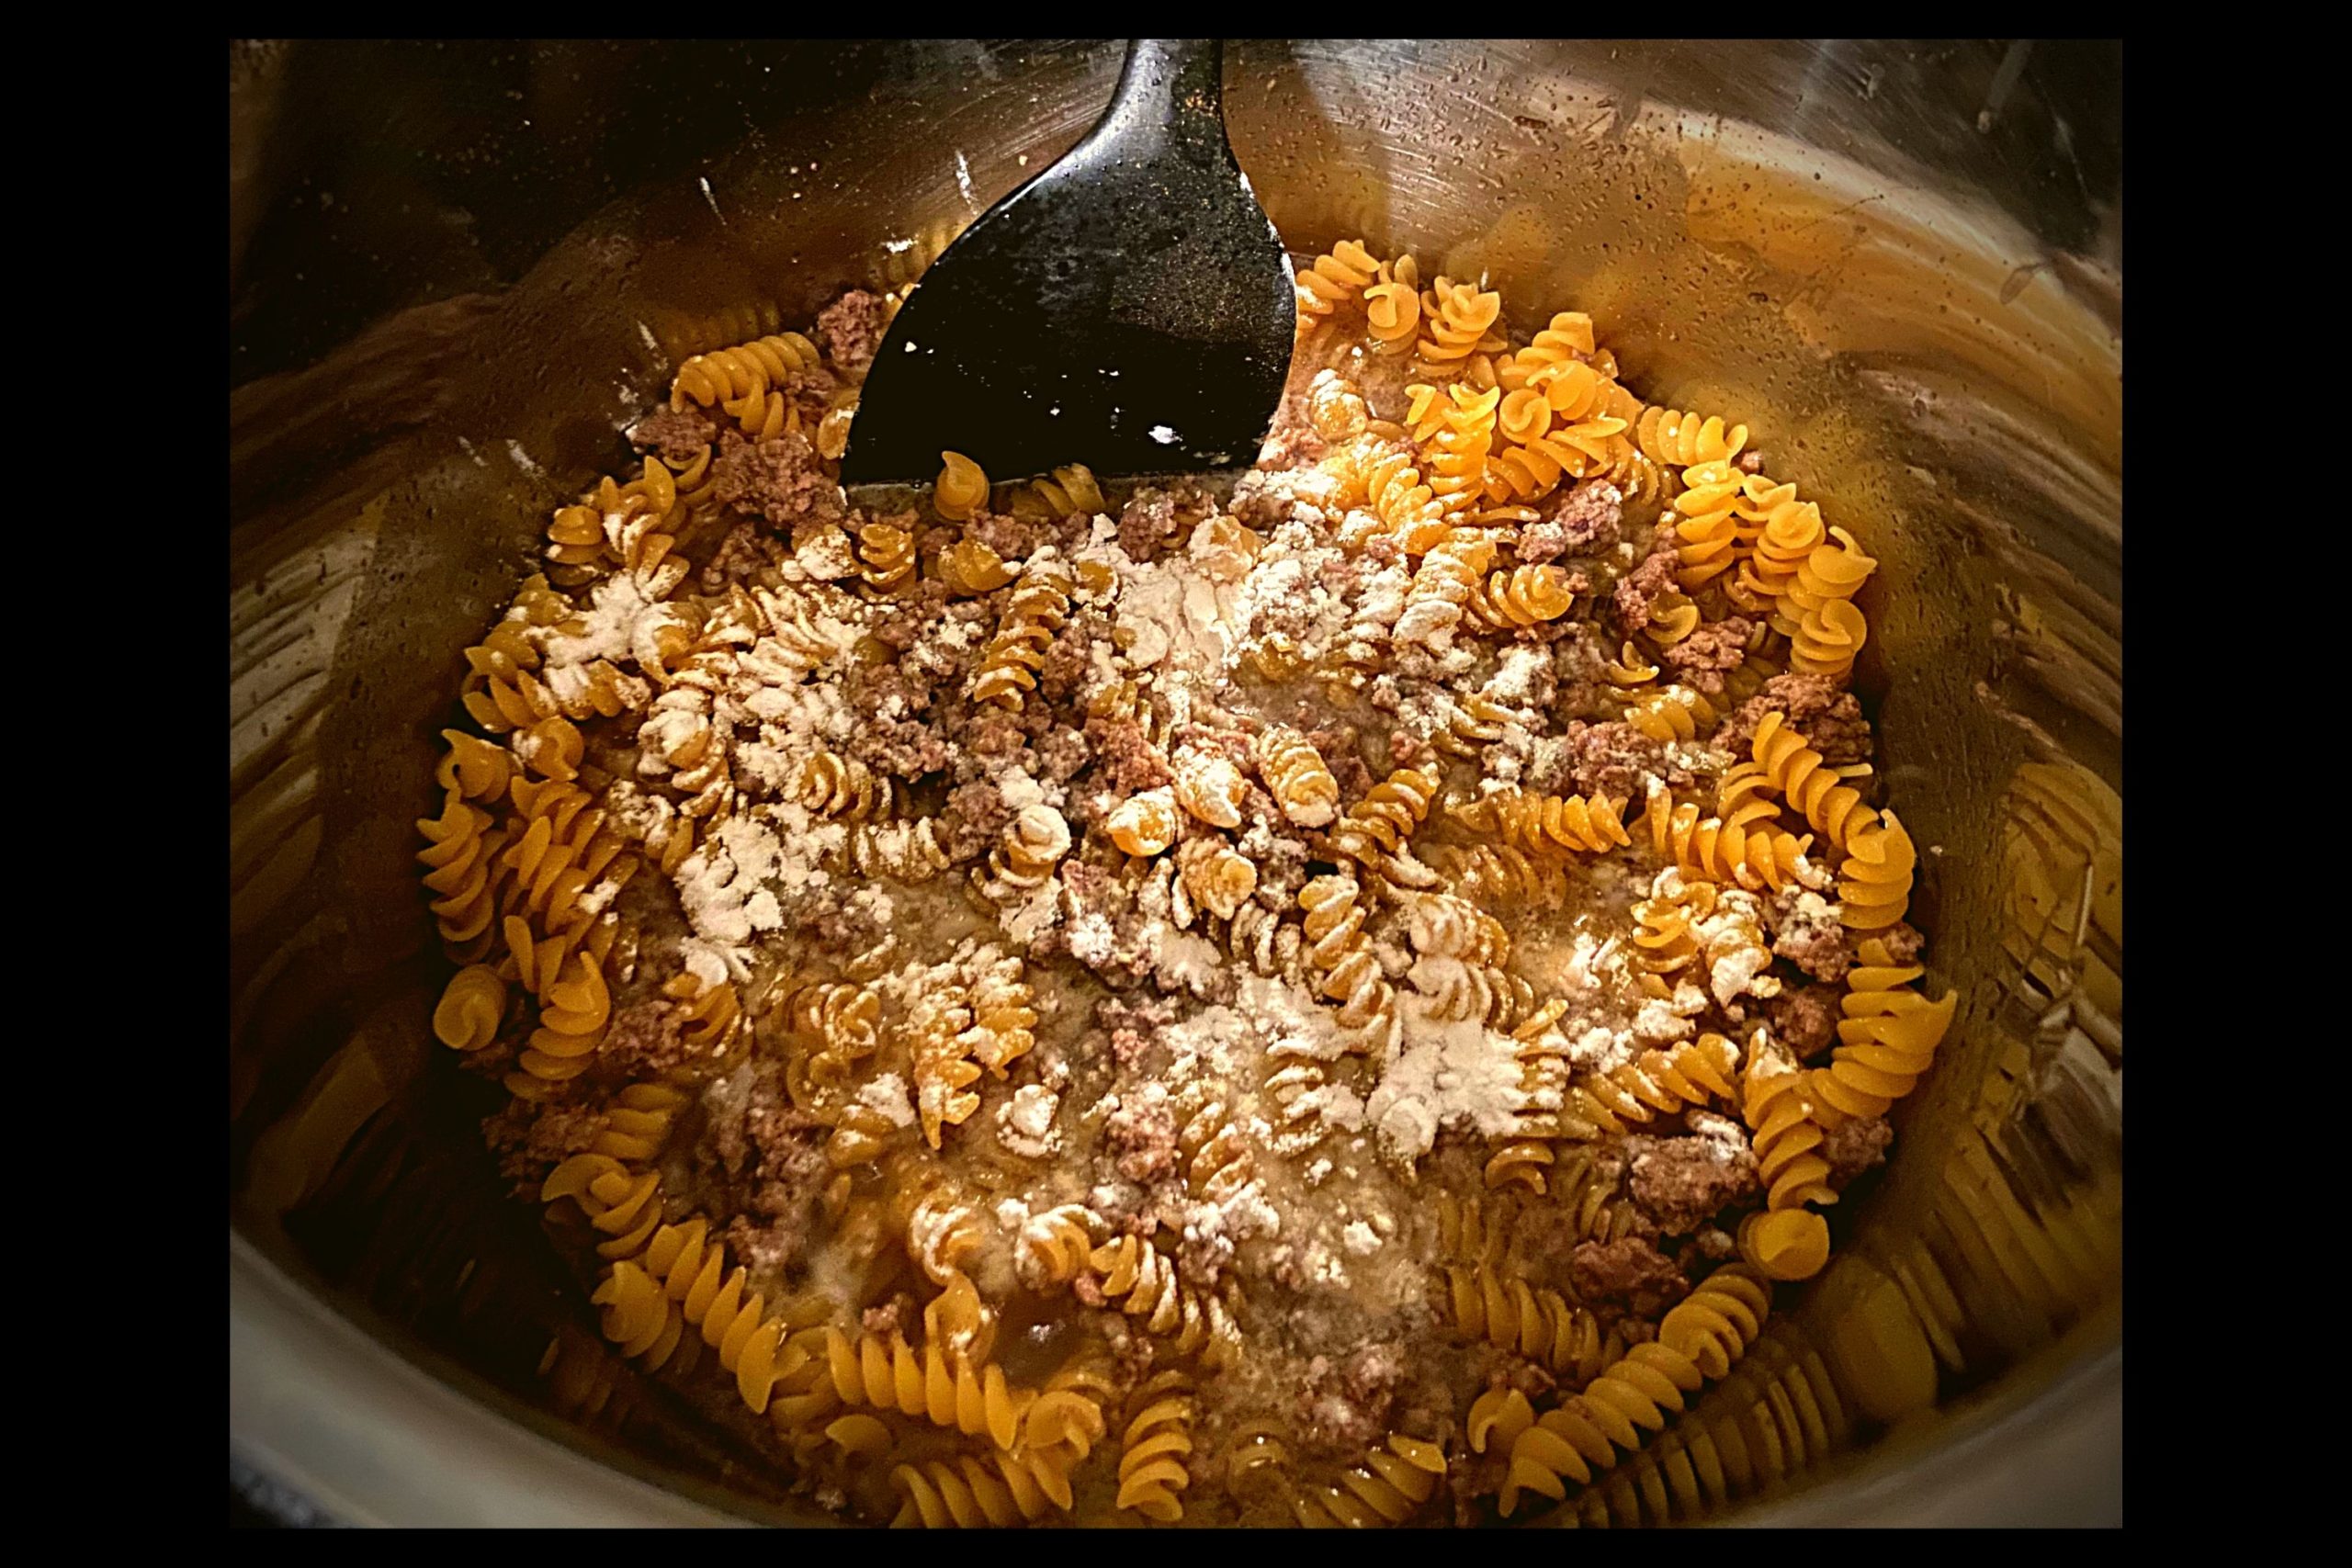 Instant Pot filled with ground meat, beef broth, rotini noodles, and topped with 1 tablespoon of flour